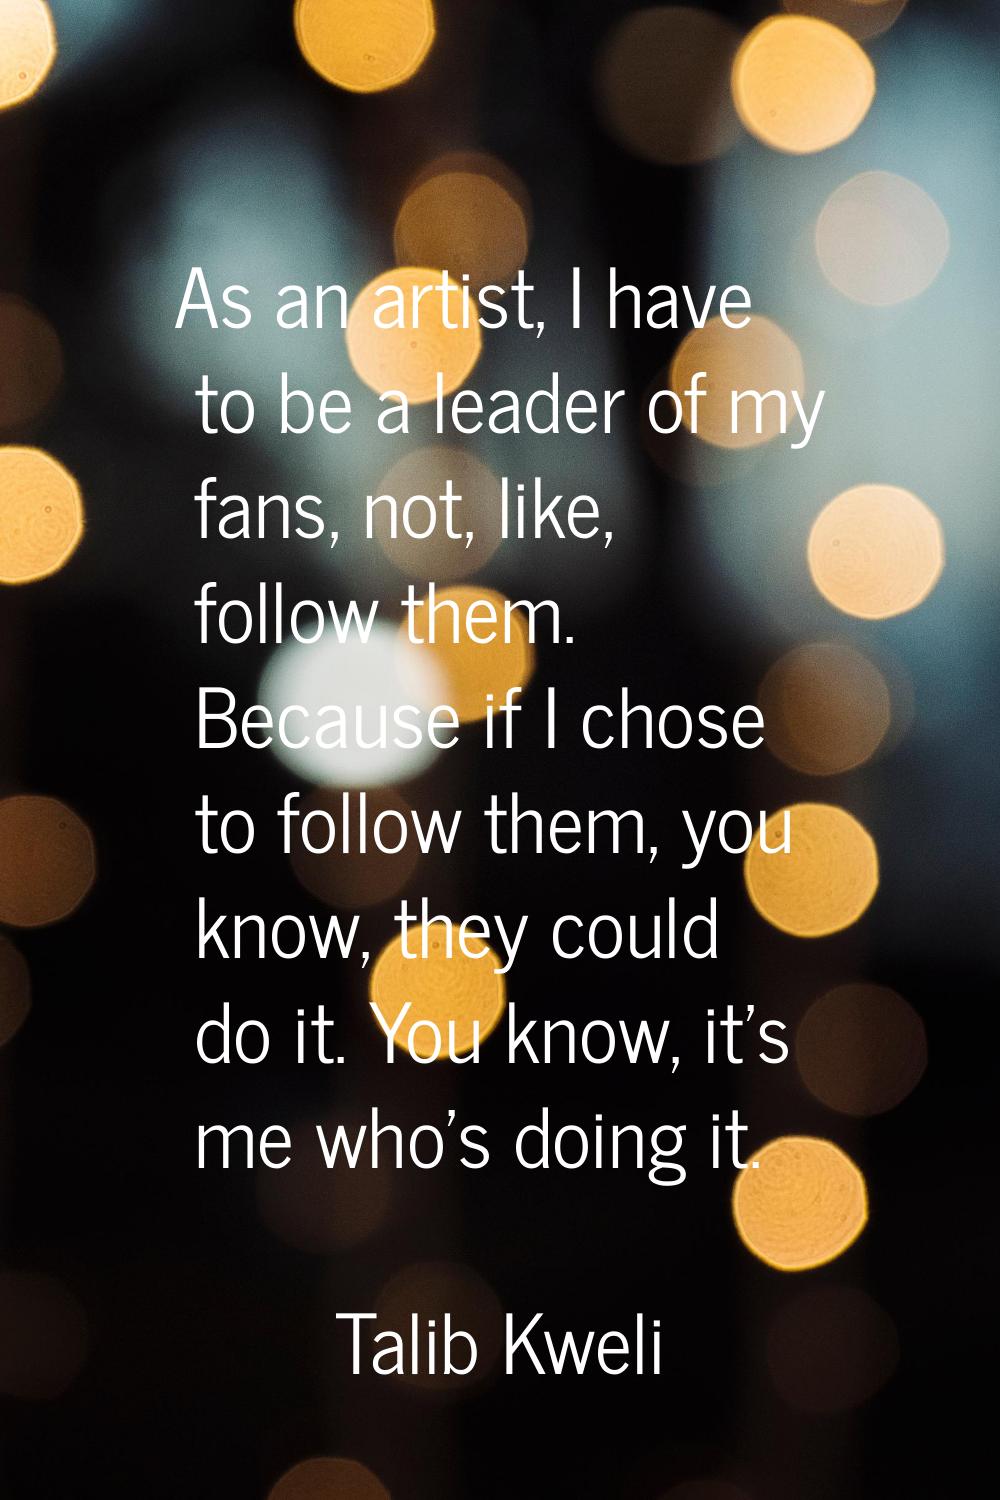 As an artist, I have to be a leader of my fans, not, like, follow them. Because if I chose to follo